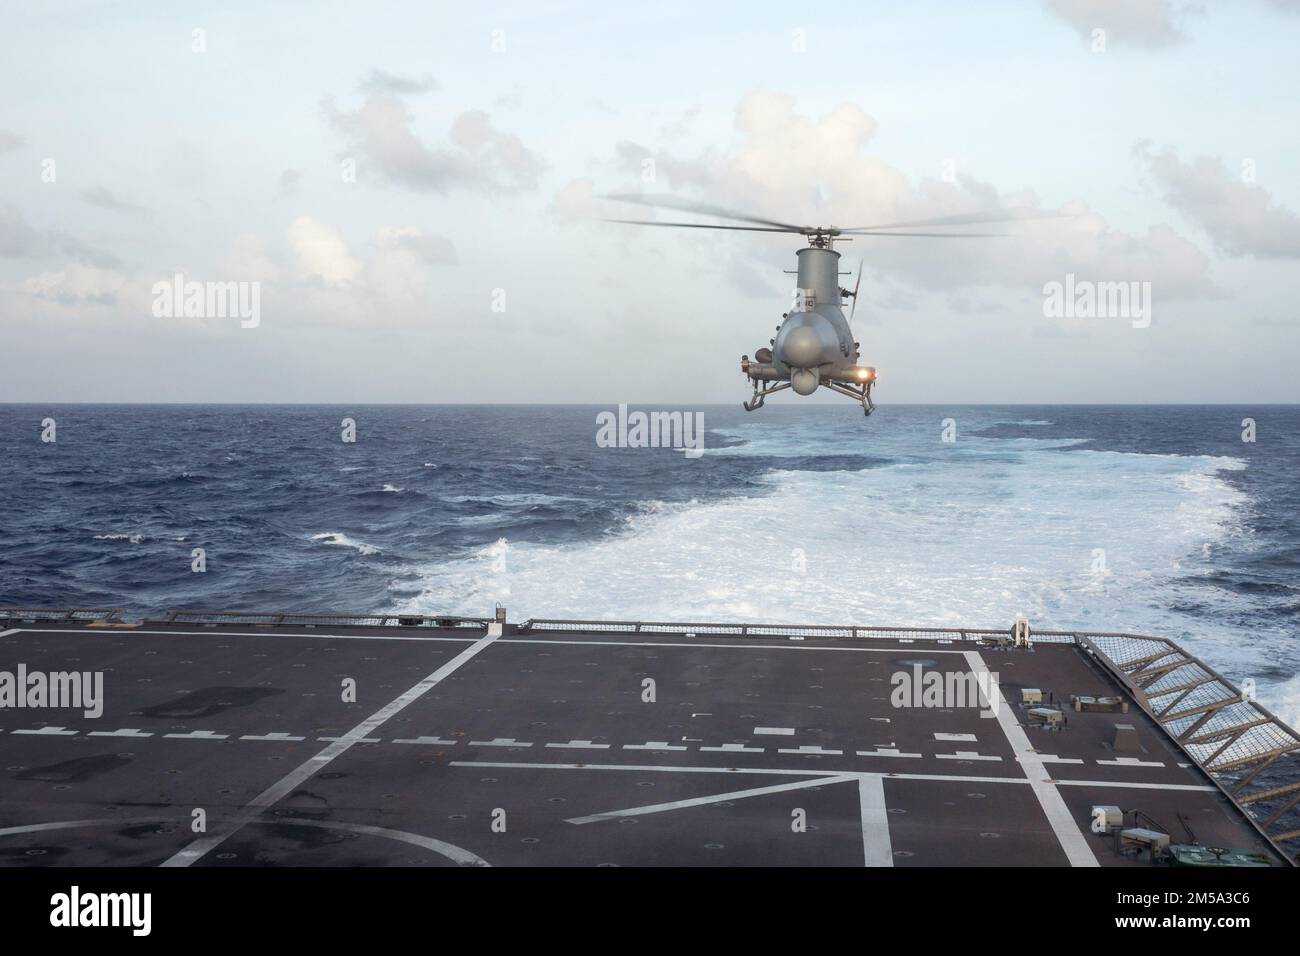 220214-N-LI768-1153  PHILIPPINE SEA (Feb. 14, 2022) – An MQ-8B Fire Scout lands on the flight deck of the Independence-variant littoral combat ship USS Tulsa (LCS 16). Tulsa, part of Destroyer Squadron (DESRON) 7, is on a rotational deployment, operating in the U.S. 7th Fleet area of operations to enhance interoperability with partners and serve as a ready-response force in support of a free and open Indo-Pacific region. Stock Photo